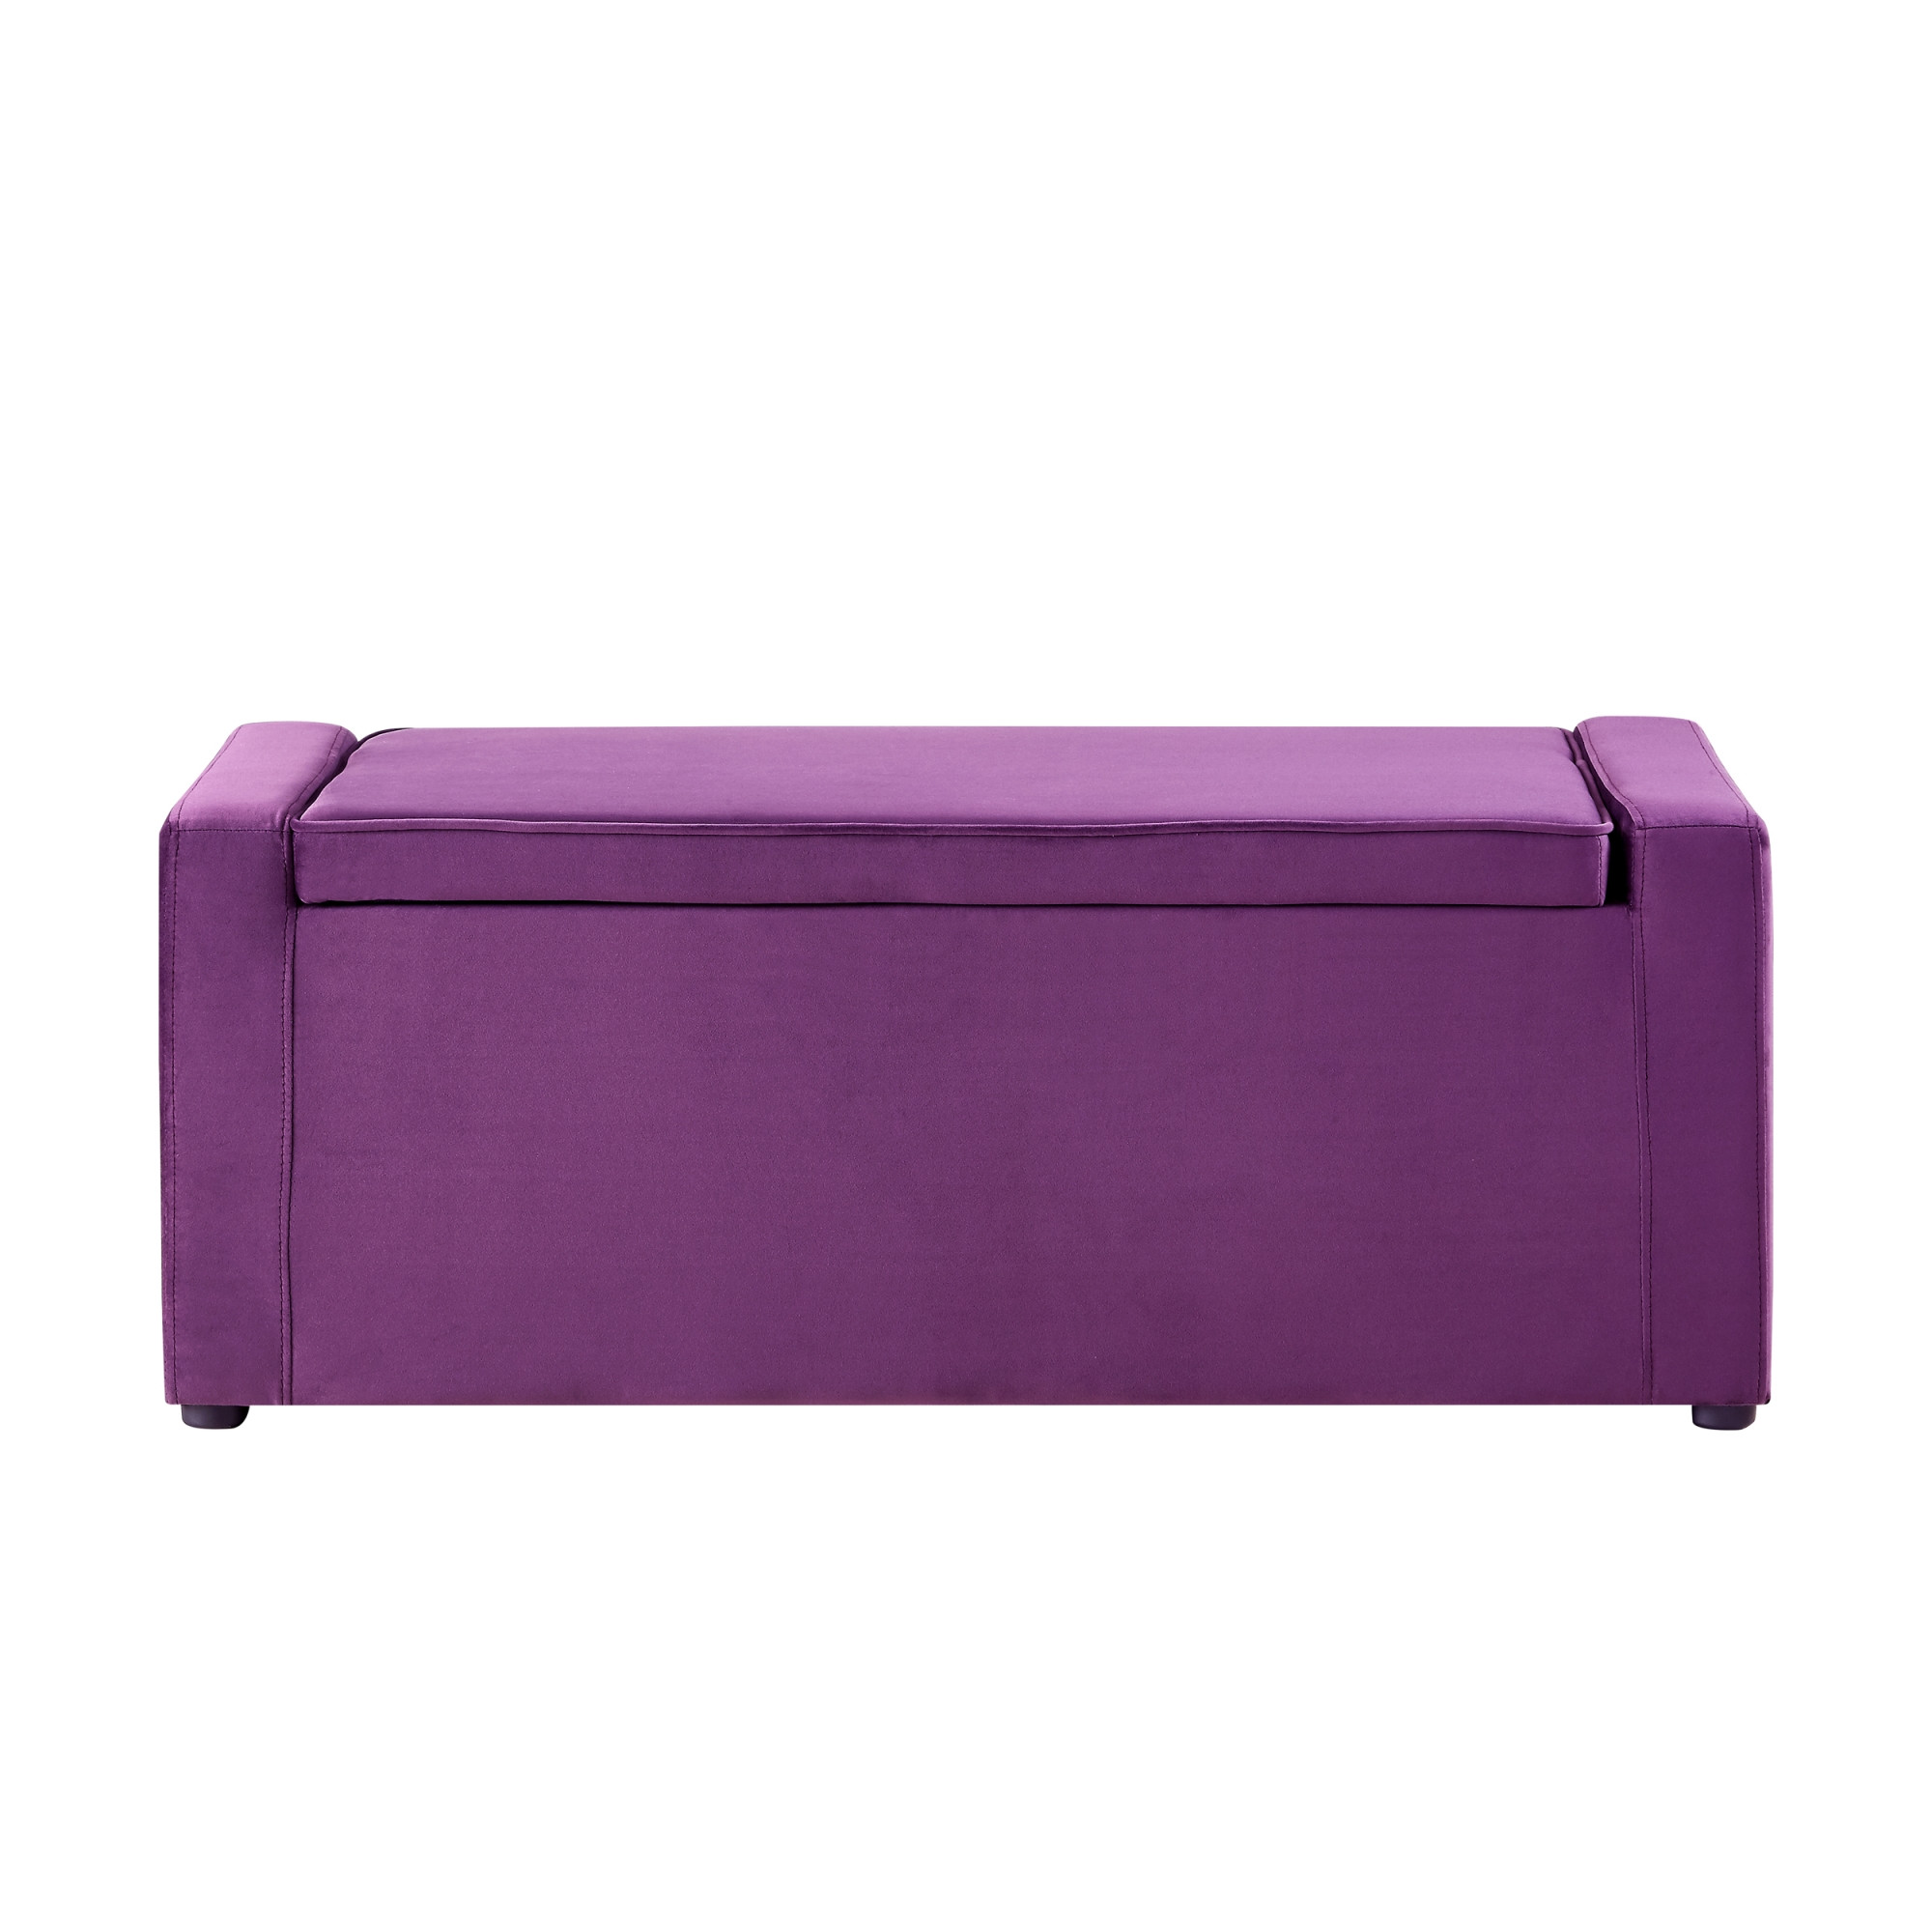 47" Purple and Black Upholstered Velvet Bench with Flip top, Shoe Storage-530673-1